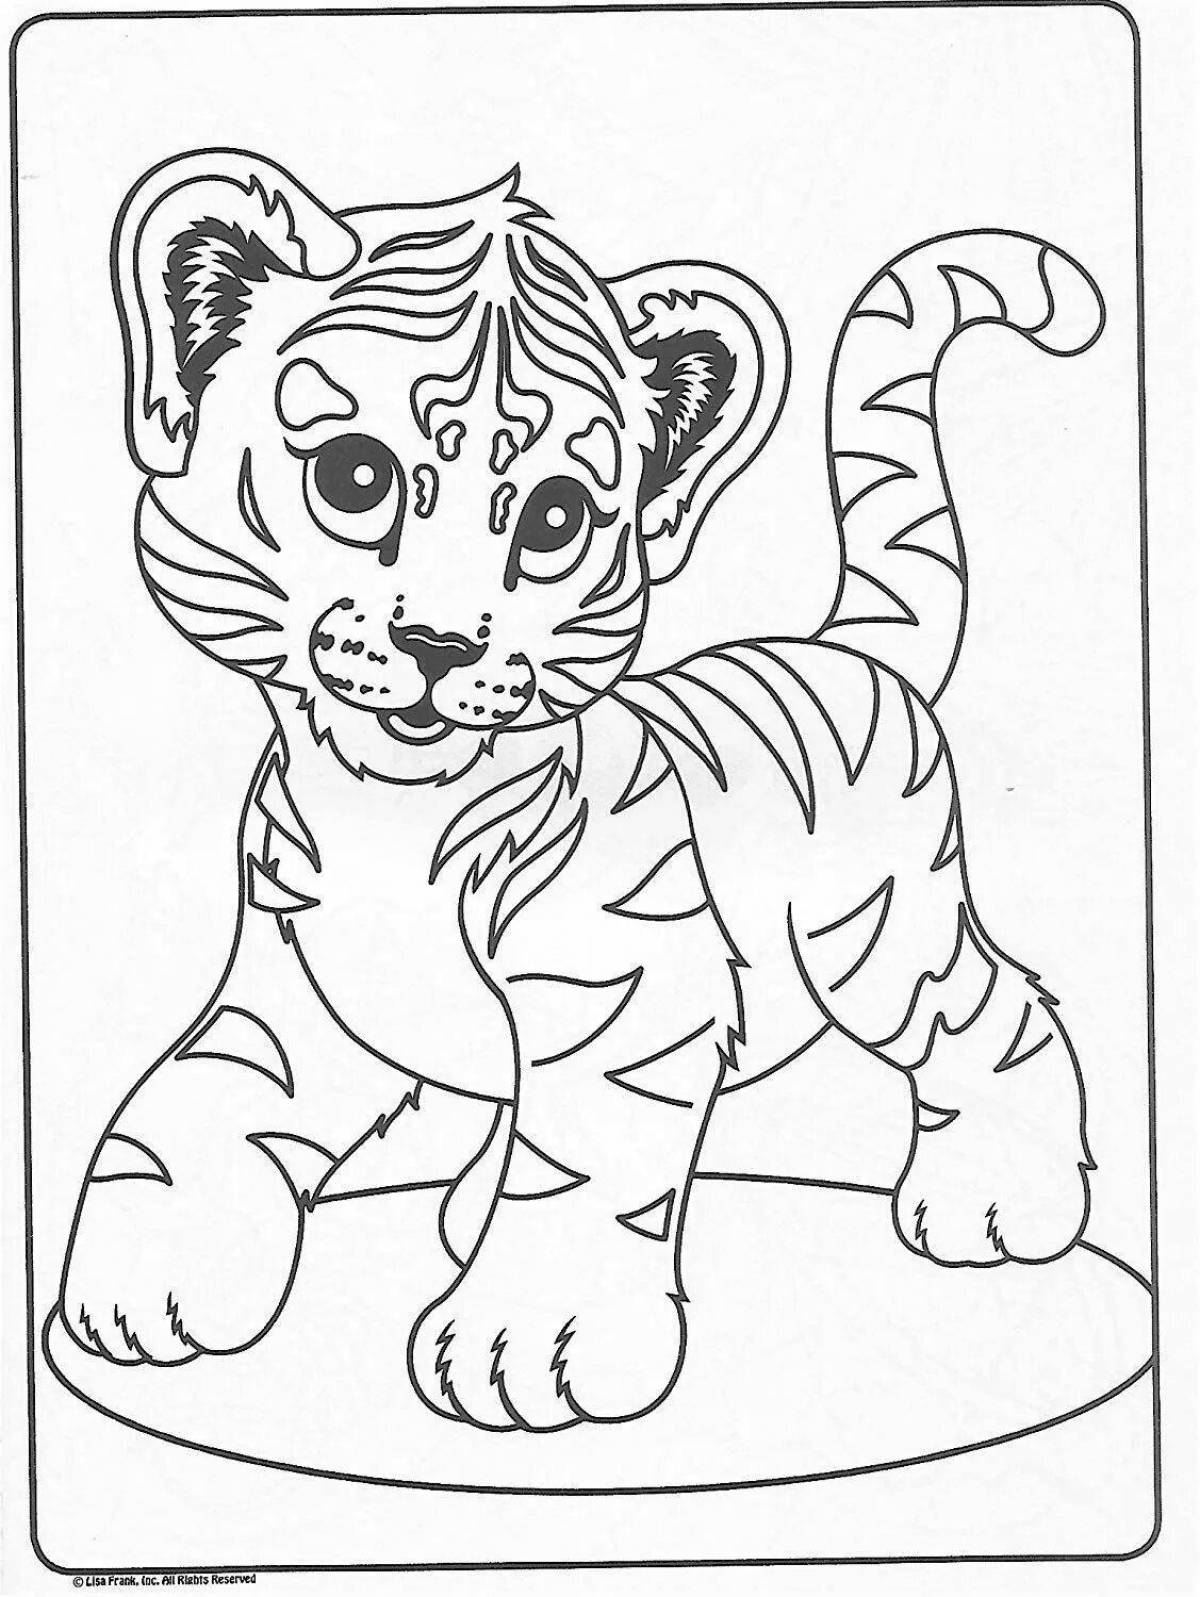 Ferocious tiger coloring book for girls